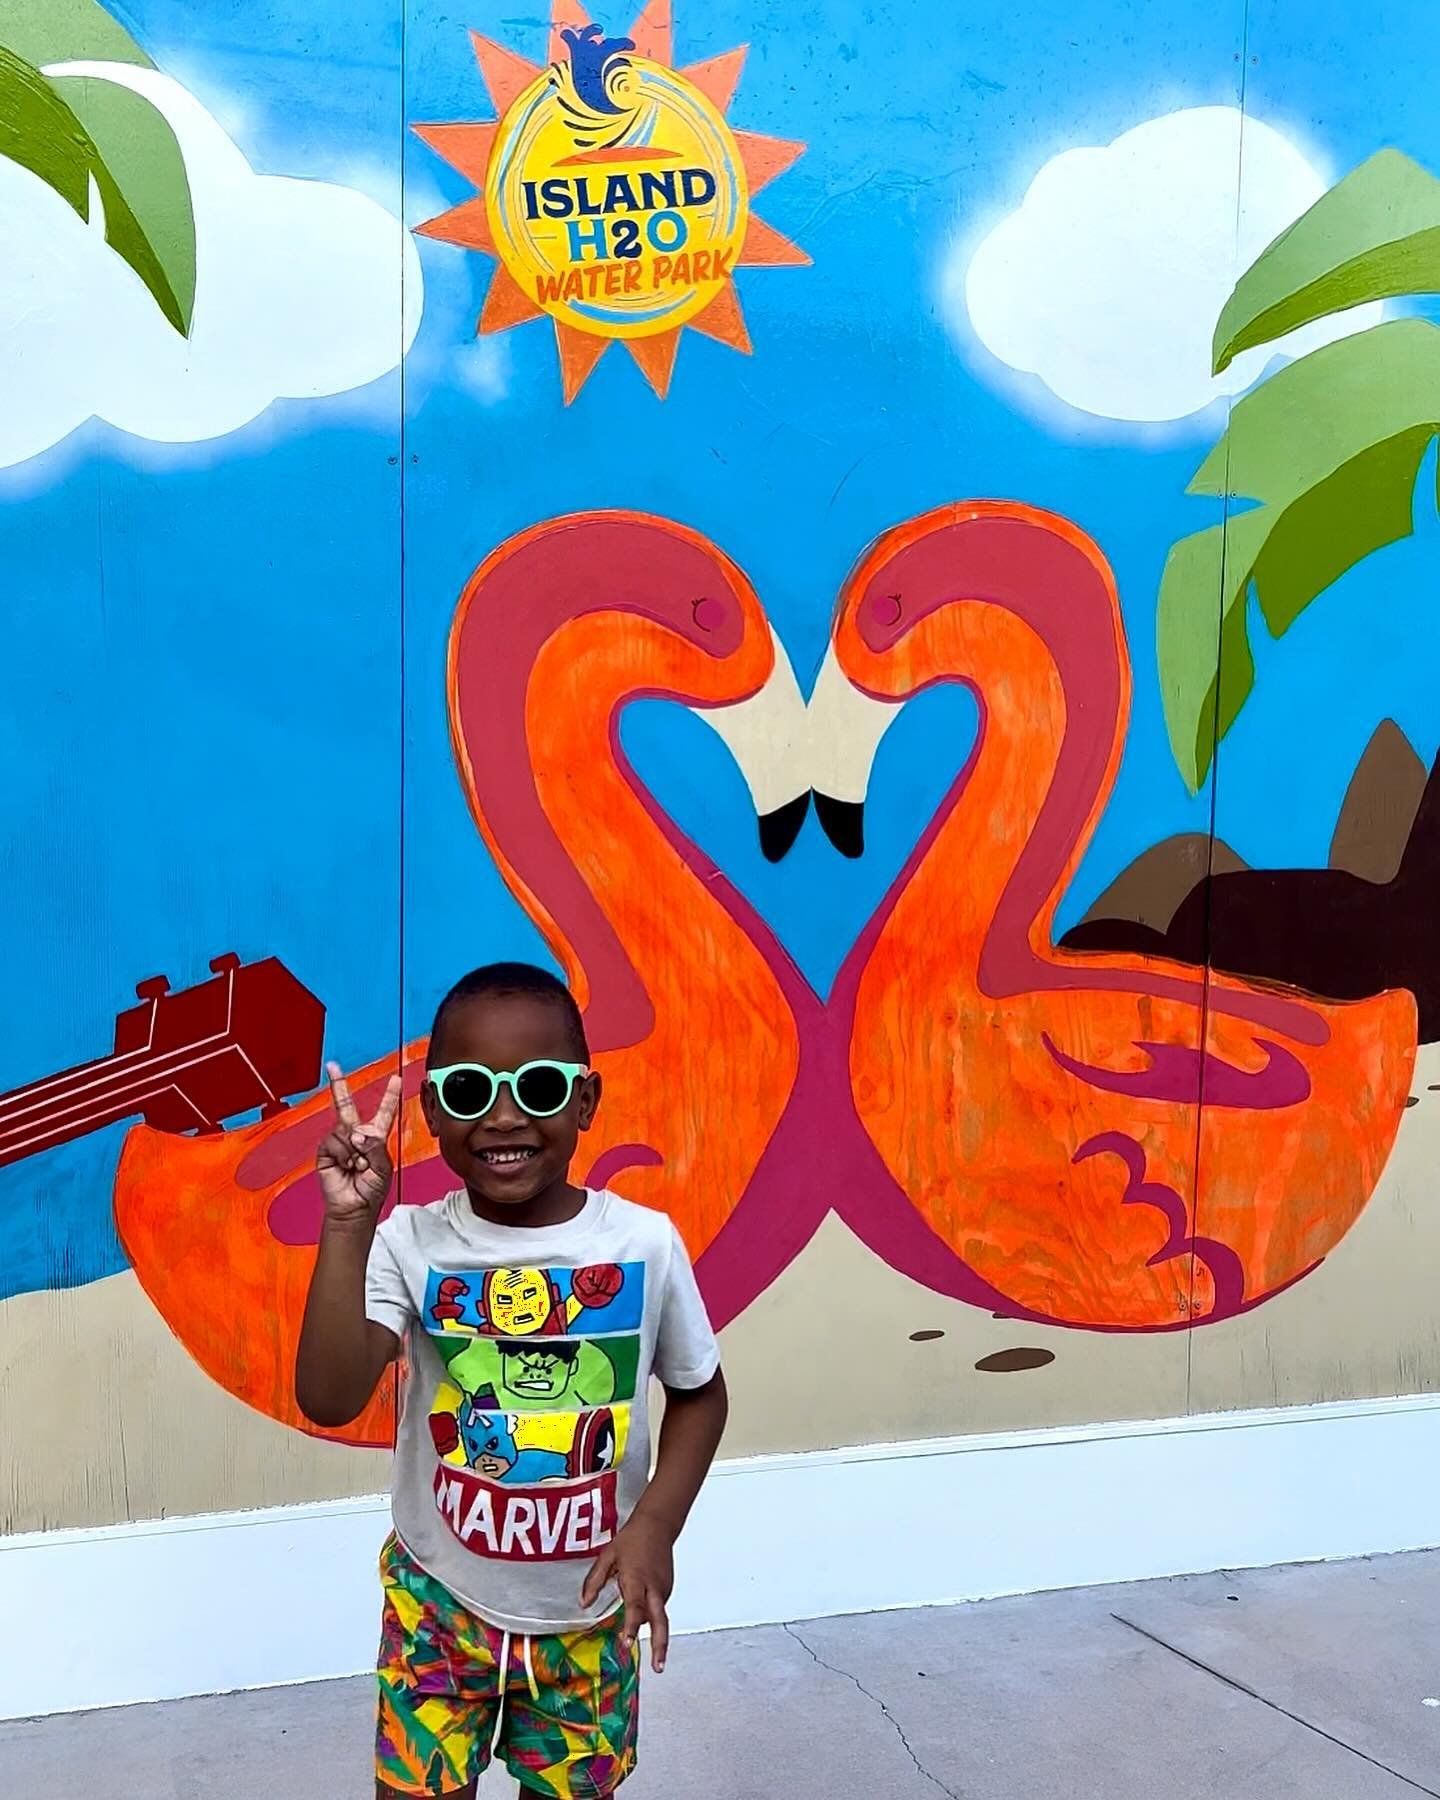 This heat has me ready for a @islandh2owaterpark!! #hosted

Have you been before? 

Orlando Fun | Orlando With Kids | Orlando Family 

#orlandomomsblog #orlandofamily #islandh20 
#orlandofun #orlandothingstodo #orlandoattractions